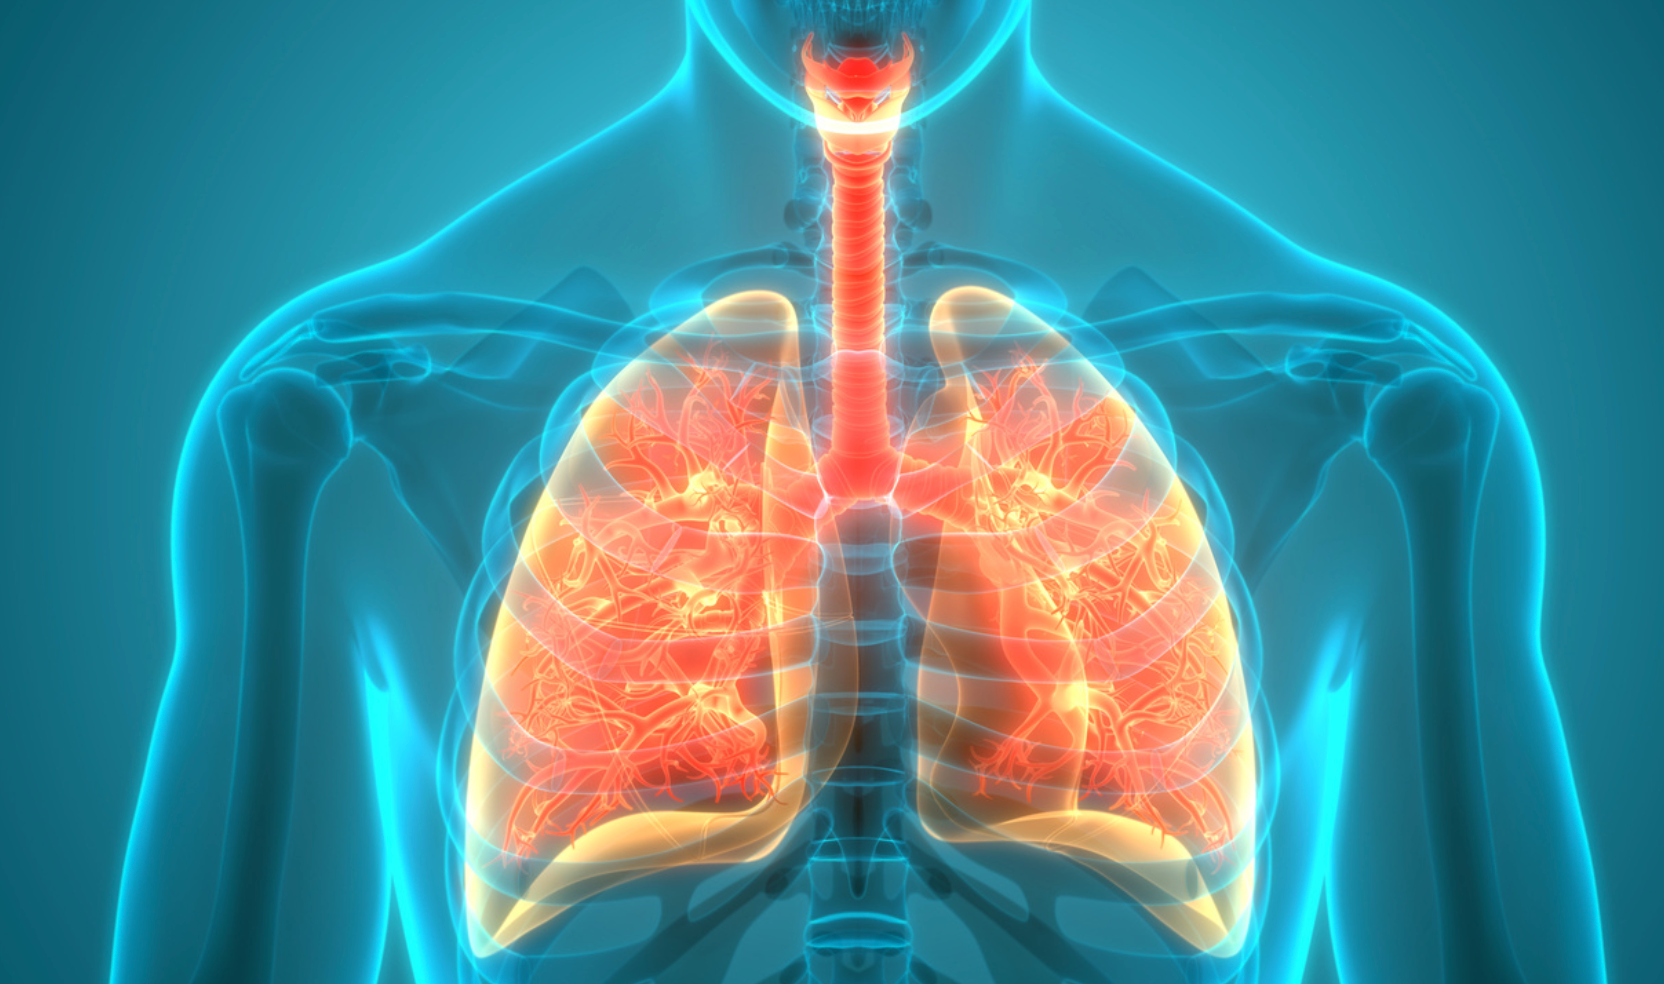 Study: Treatment With Canakinumab Does Not Lead to Disease-Free Survival for Certain Lung Cancers